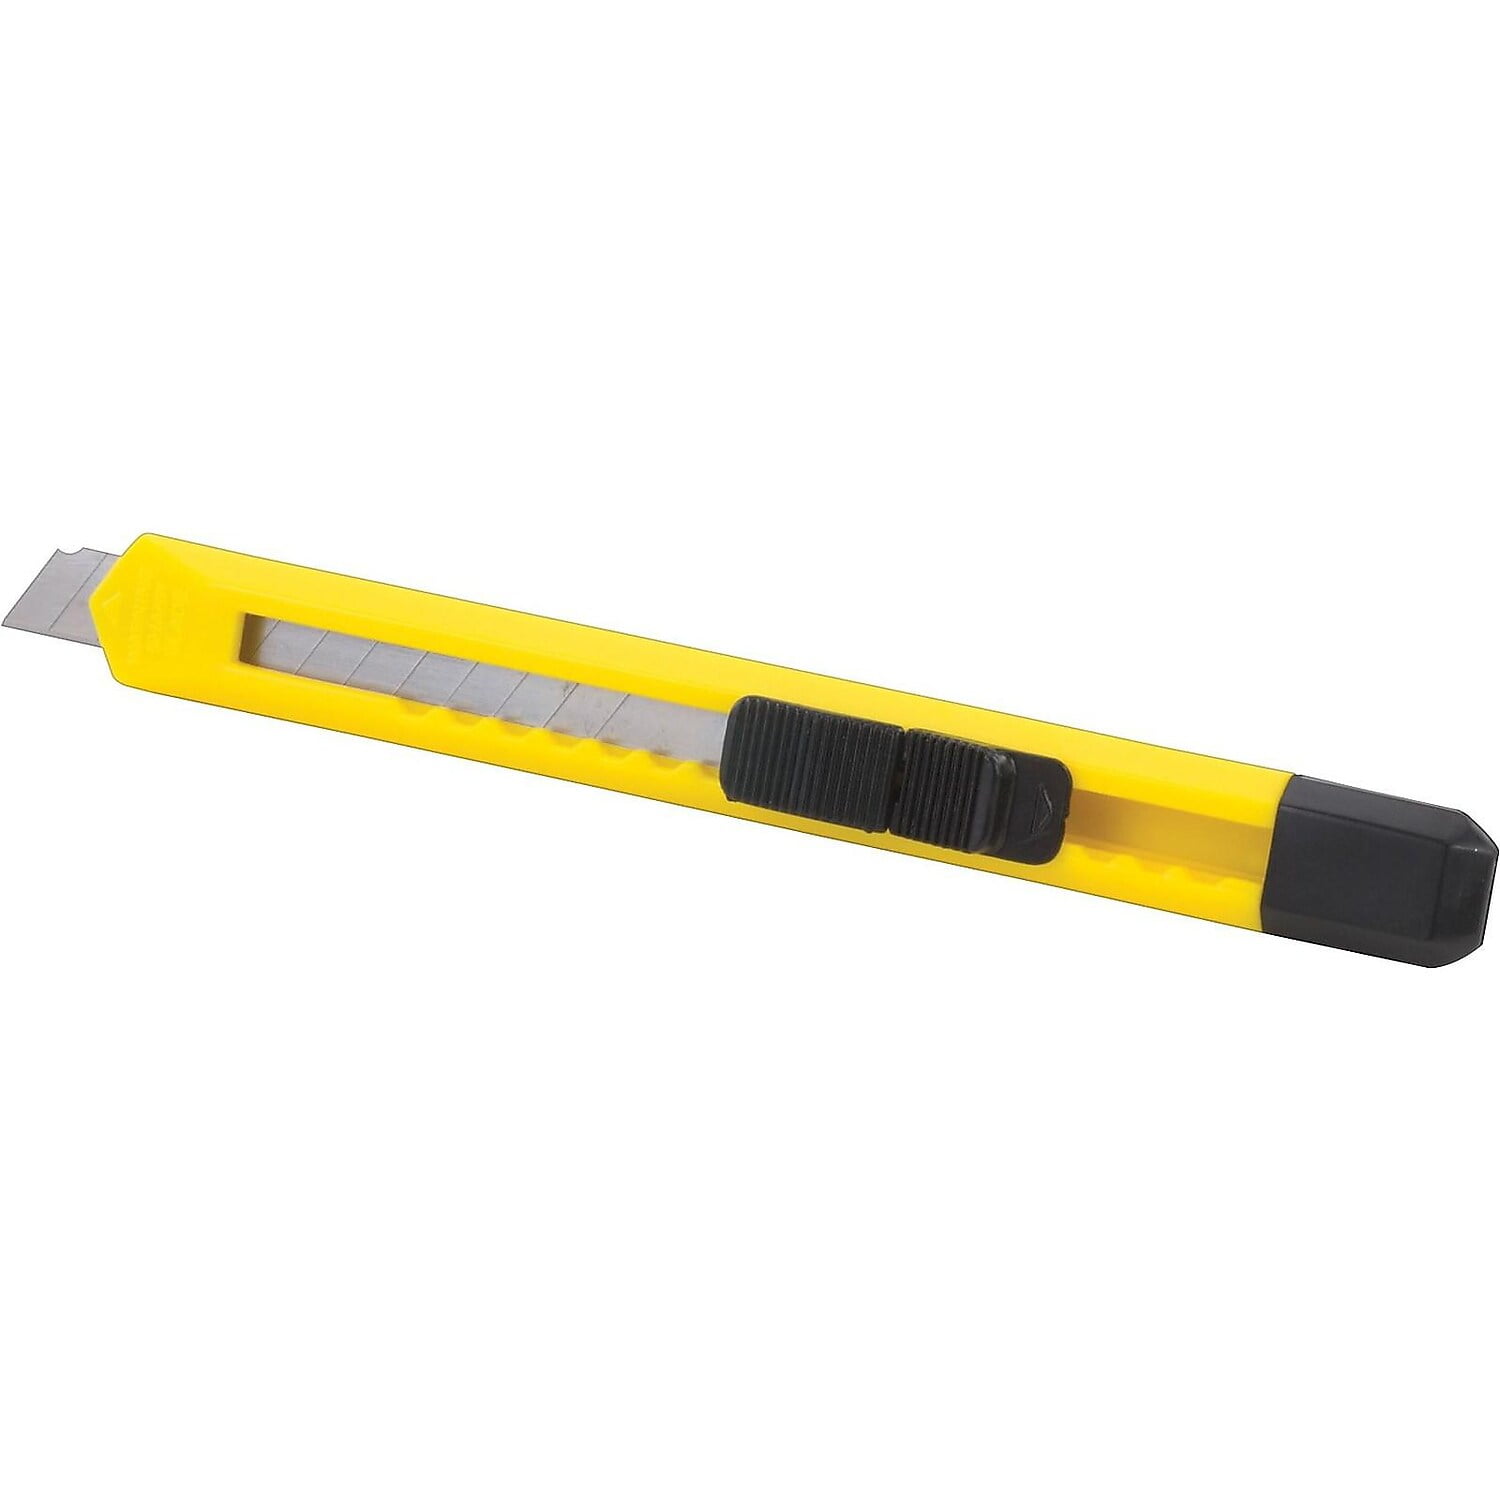 Stanley 0-10-150 Snap Off knife SM, Black/Yellow - Utility Knives 